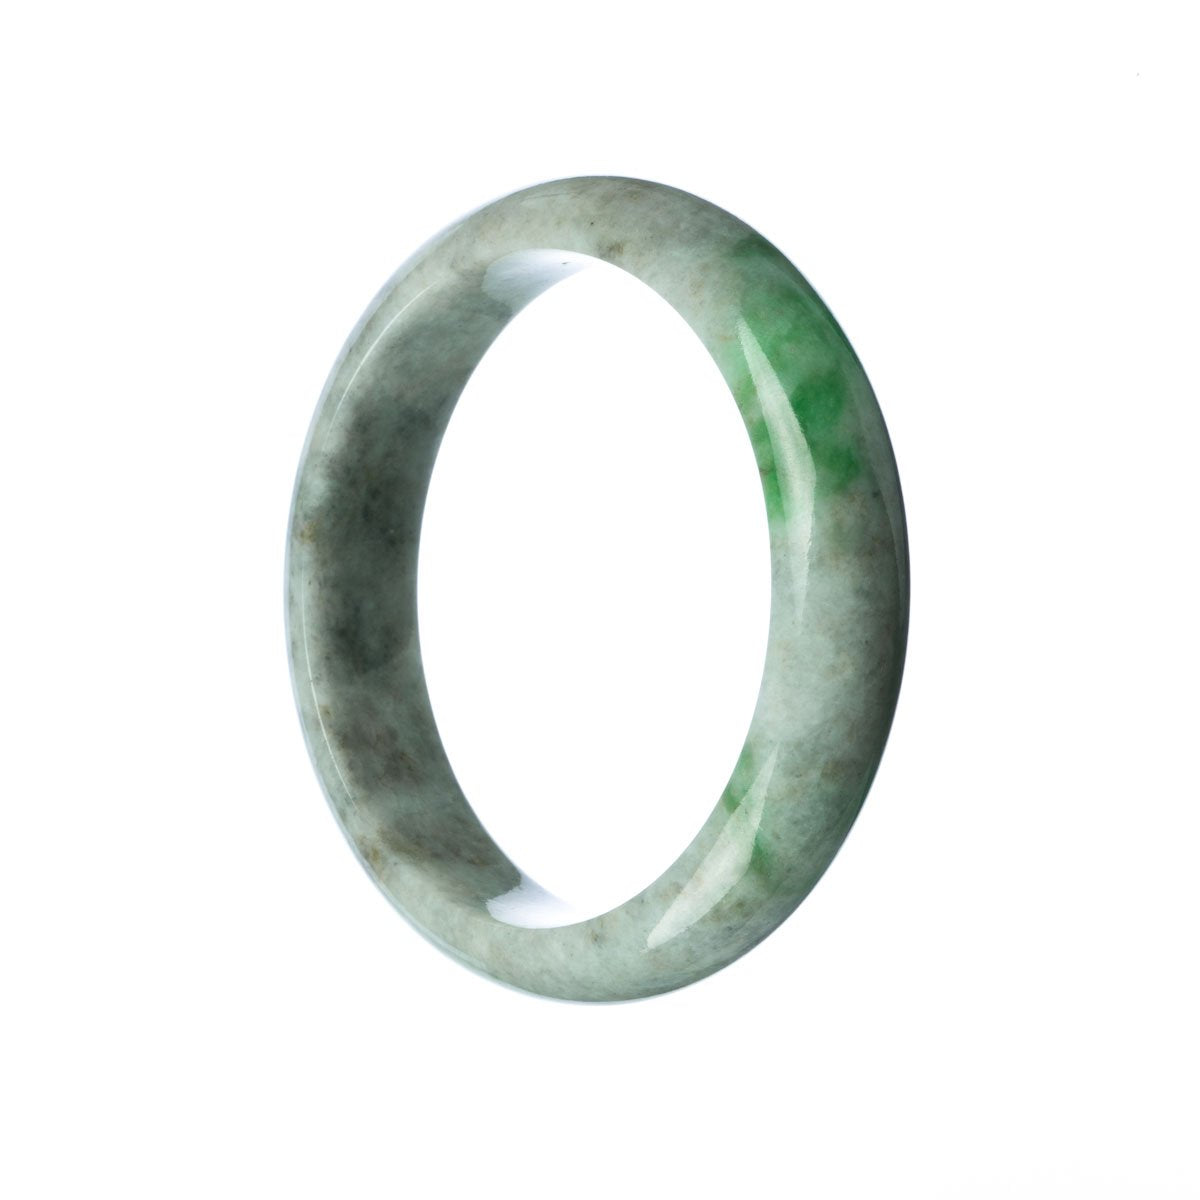 A close-up image of a genuine natural grey green Burma jade bangle. The bangle has a unique half moon shape and measures 59mm in diameter. Crafted by MAYS GEMS.